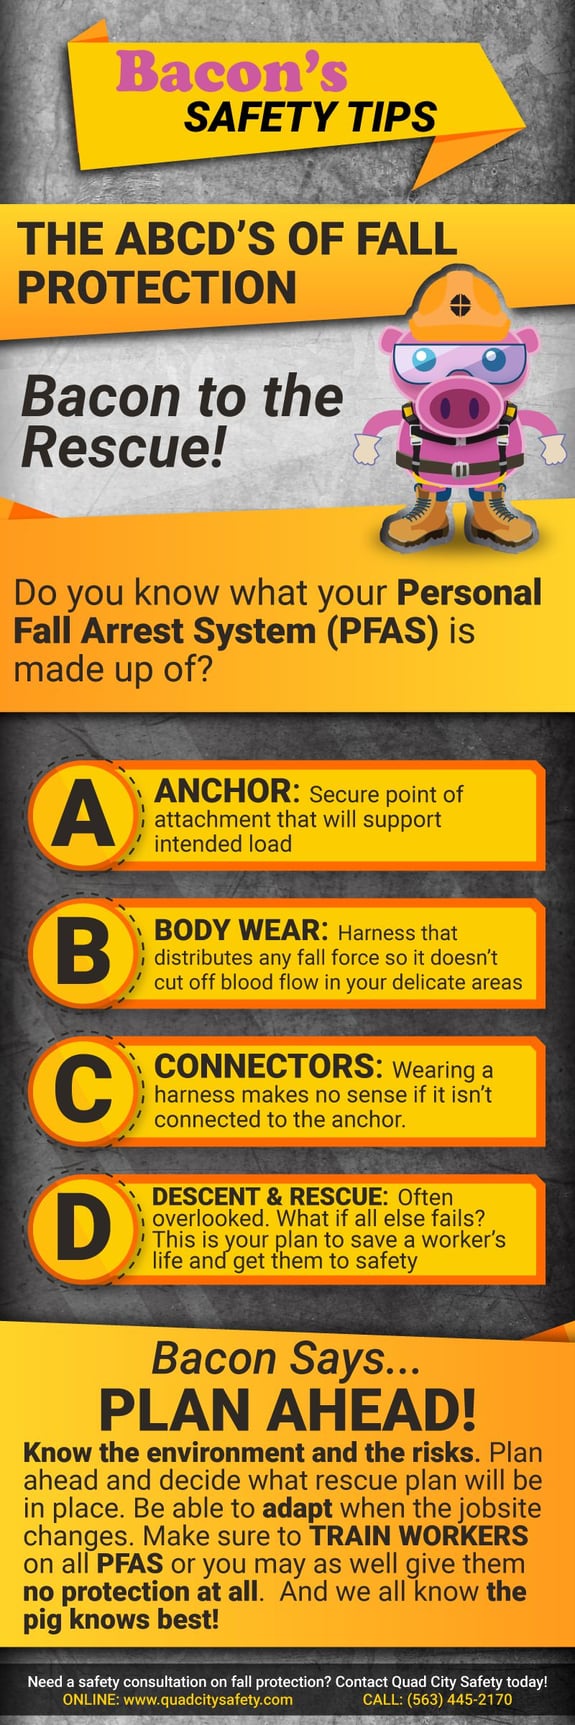 Bacon's Safety Tips The ABCD's of Fall Protection